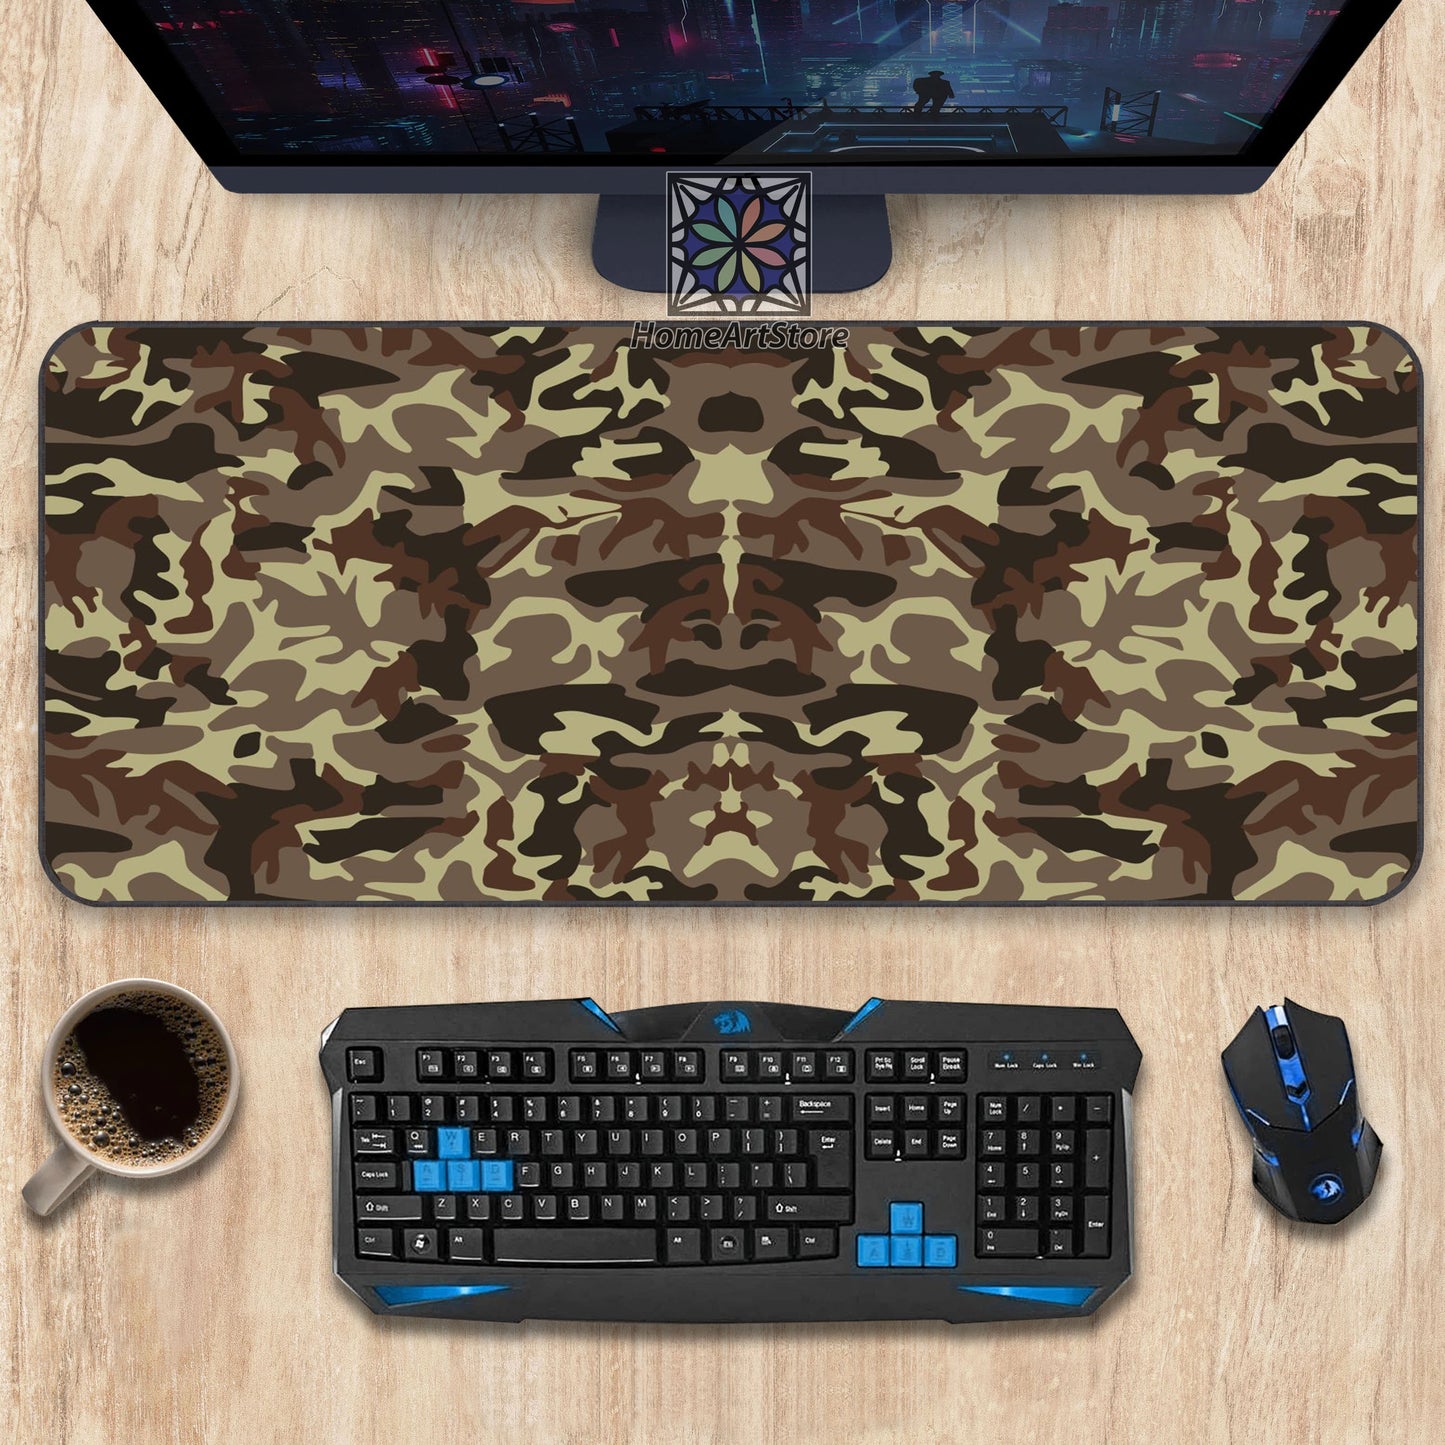 Camouflage Military Themed Mouse Mat, Camouflage Art Decor, Call of The Wild Camouflage Desk Pad, Office Gift